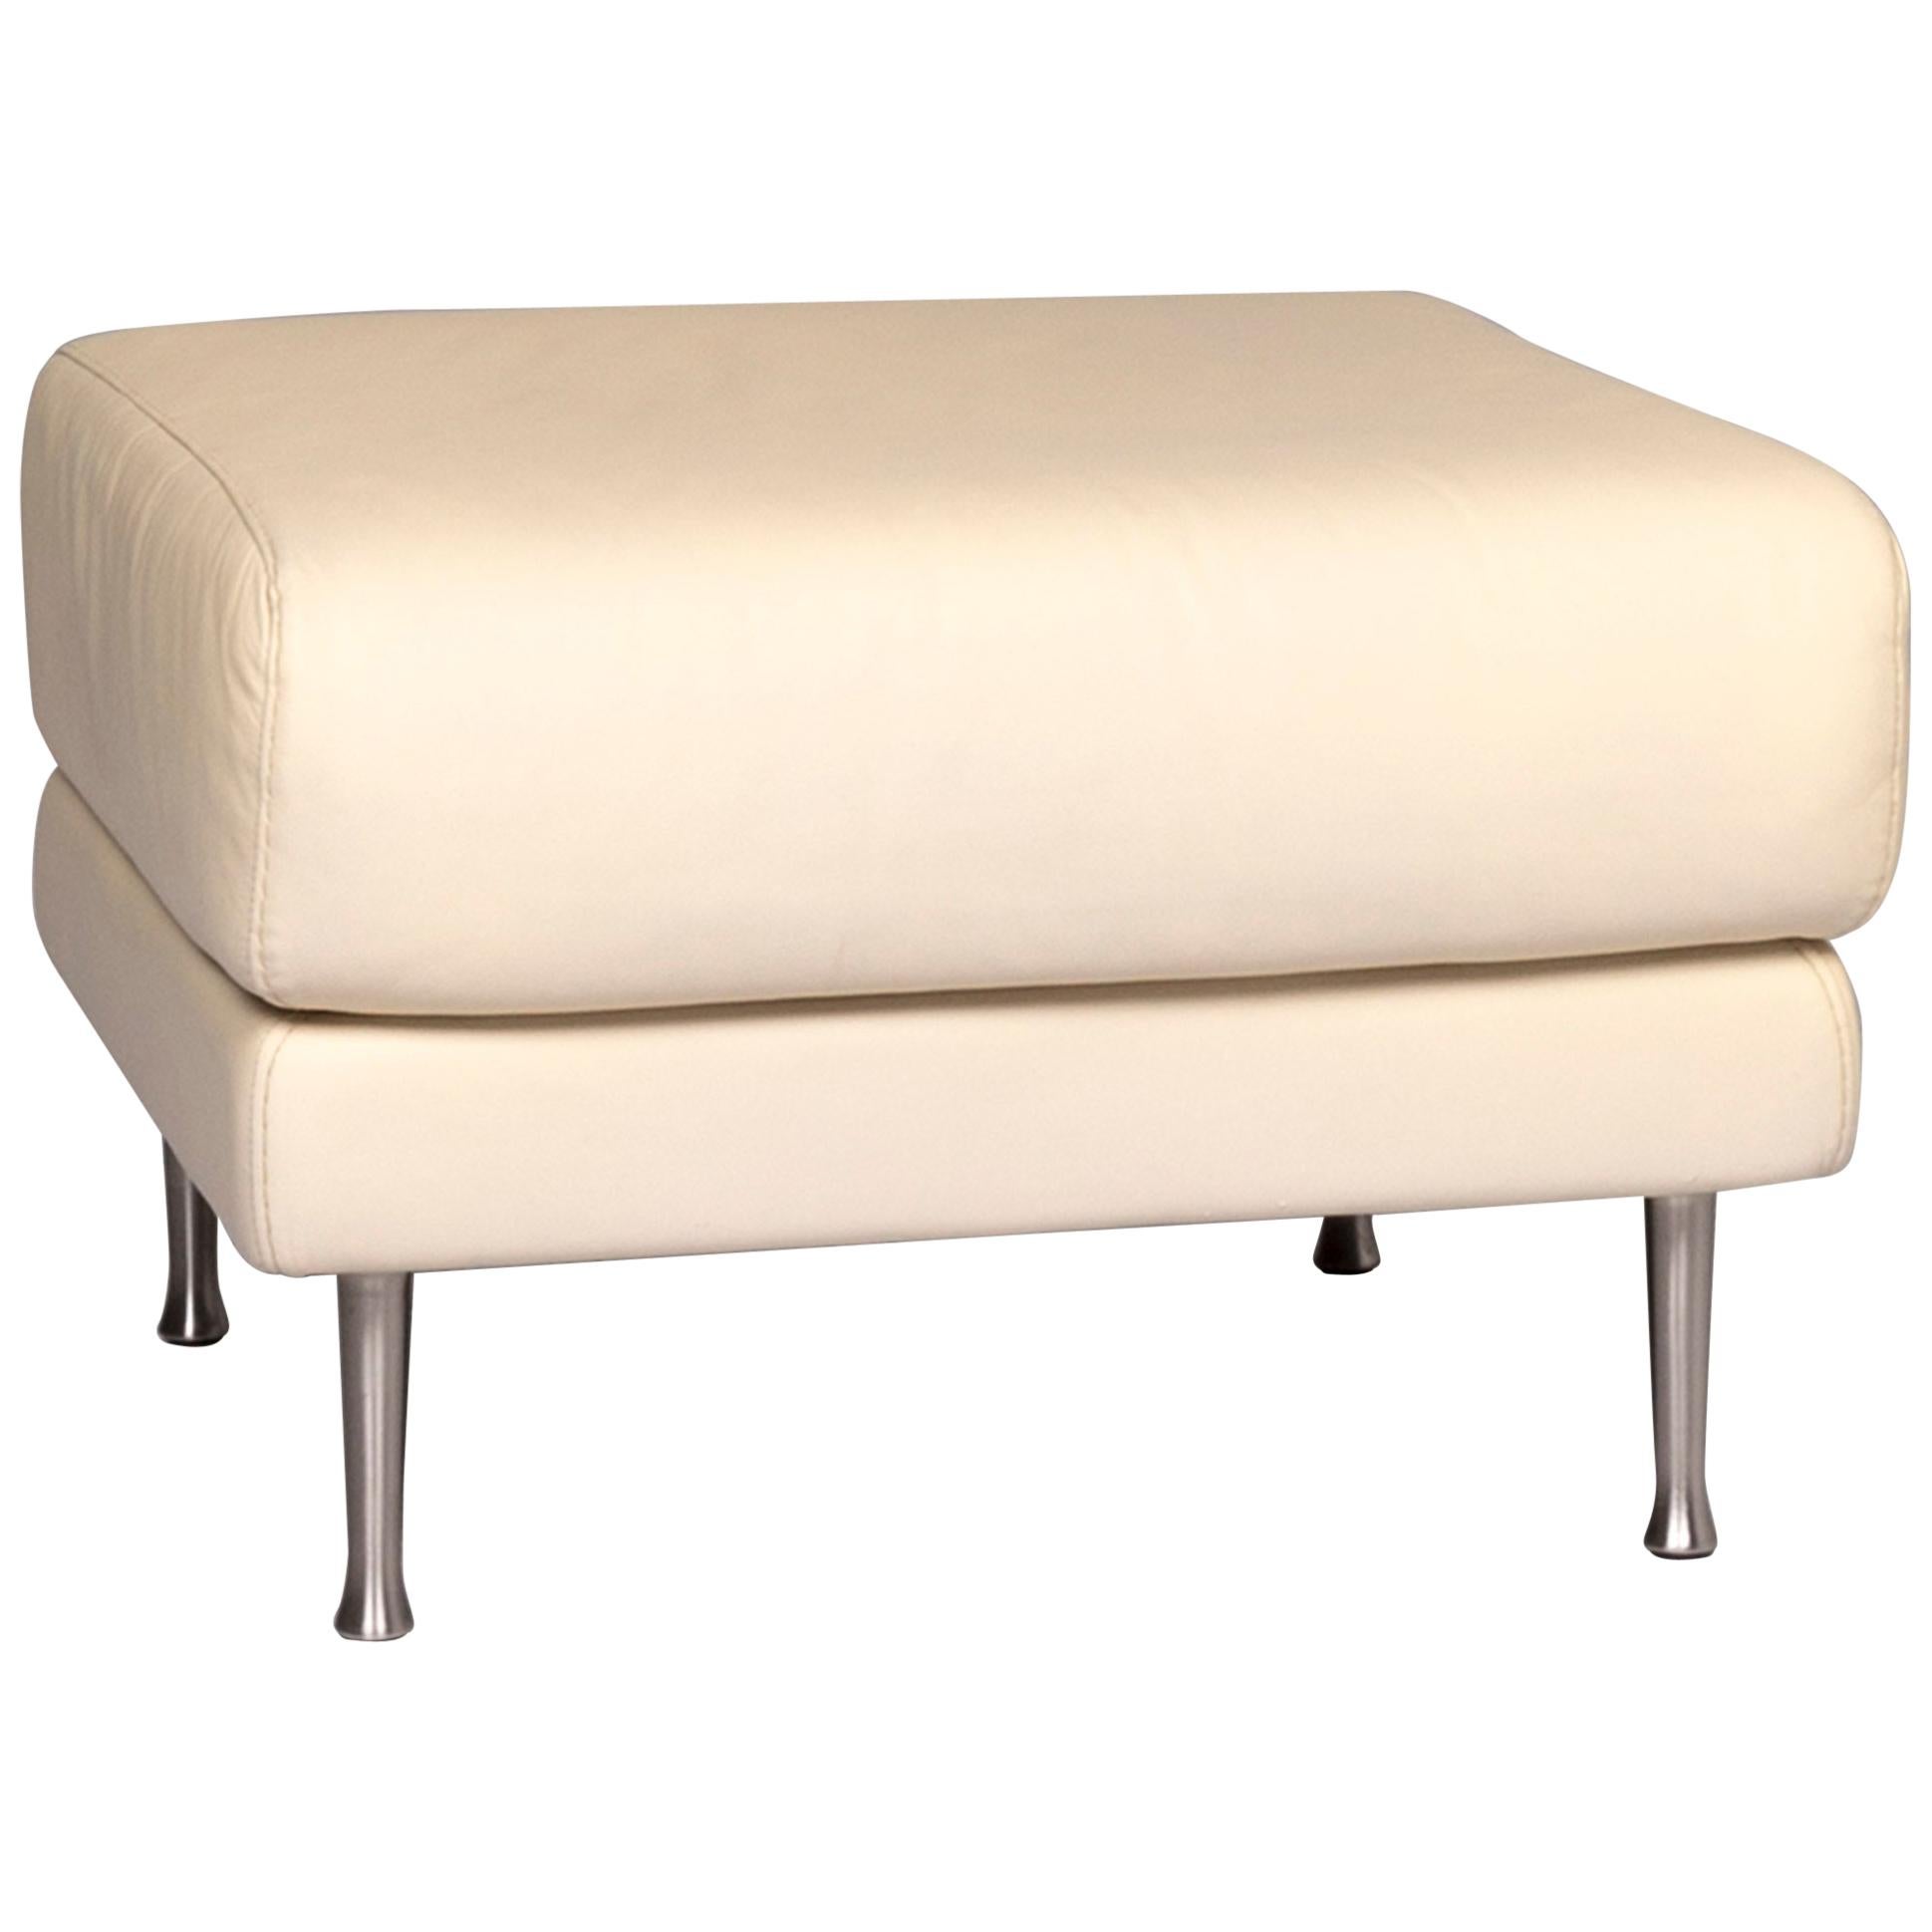 Koinor Leather Stool Cream Stool For Sale